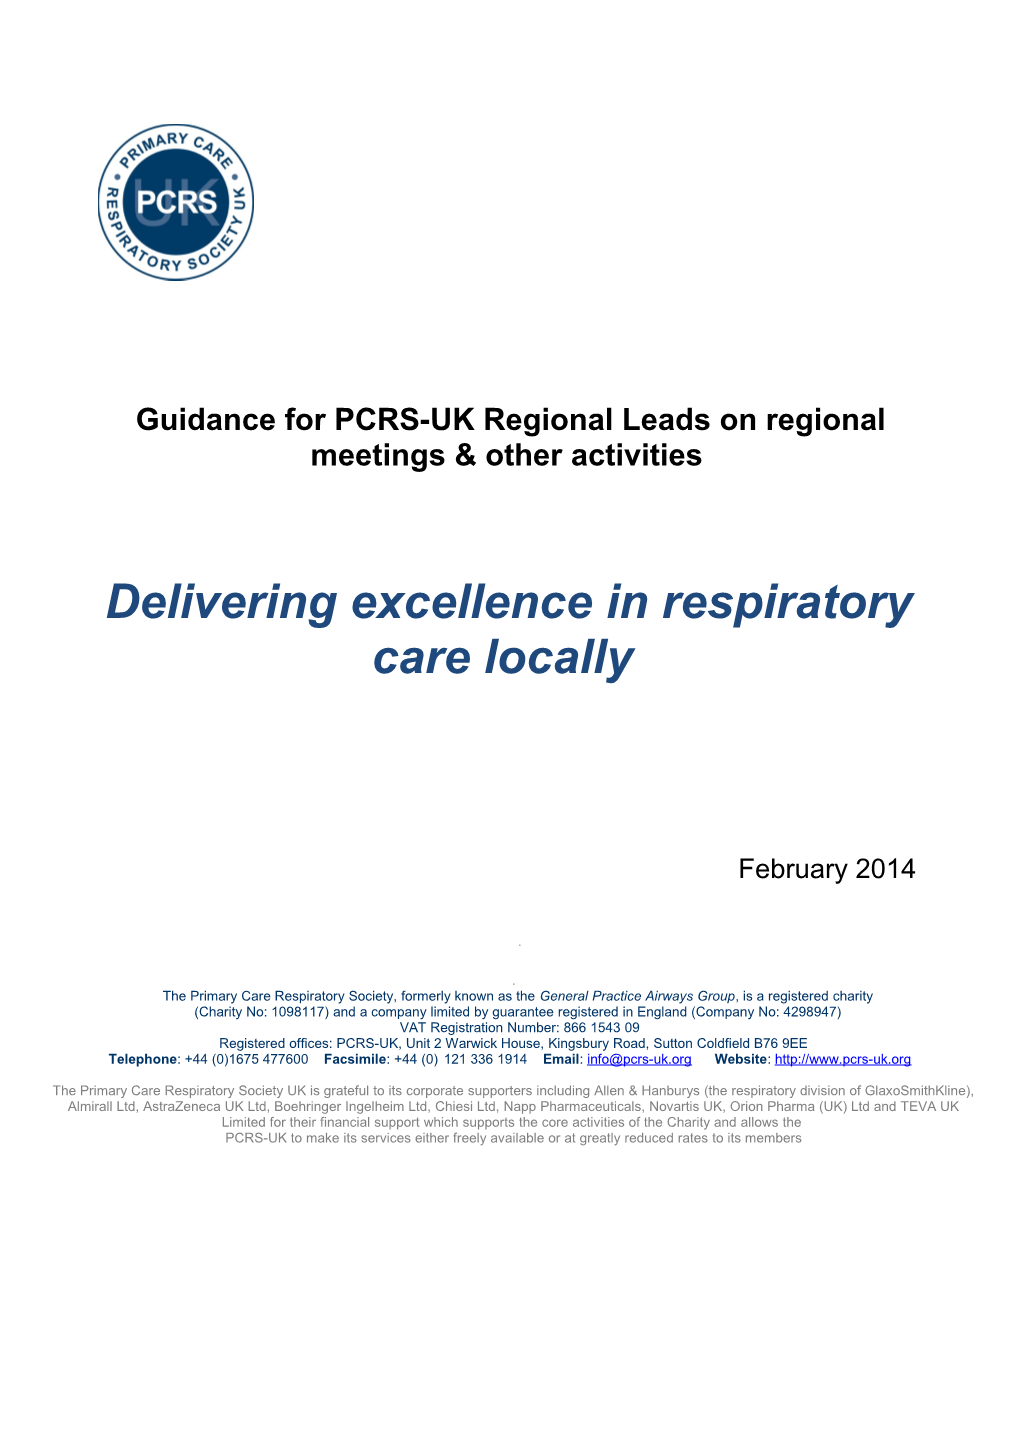 Guidance for PCRS-UK Regional Leads on Regional Meetings & Other Activities